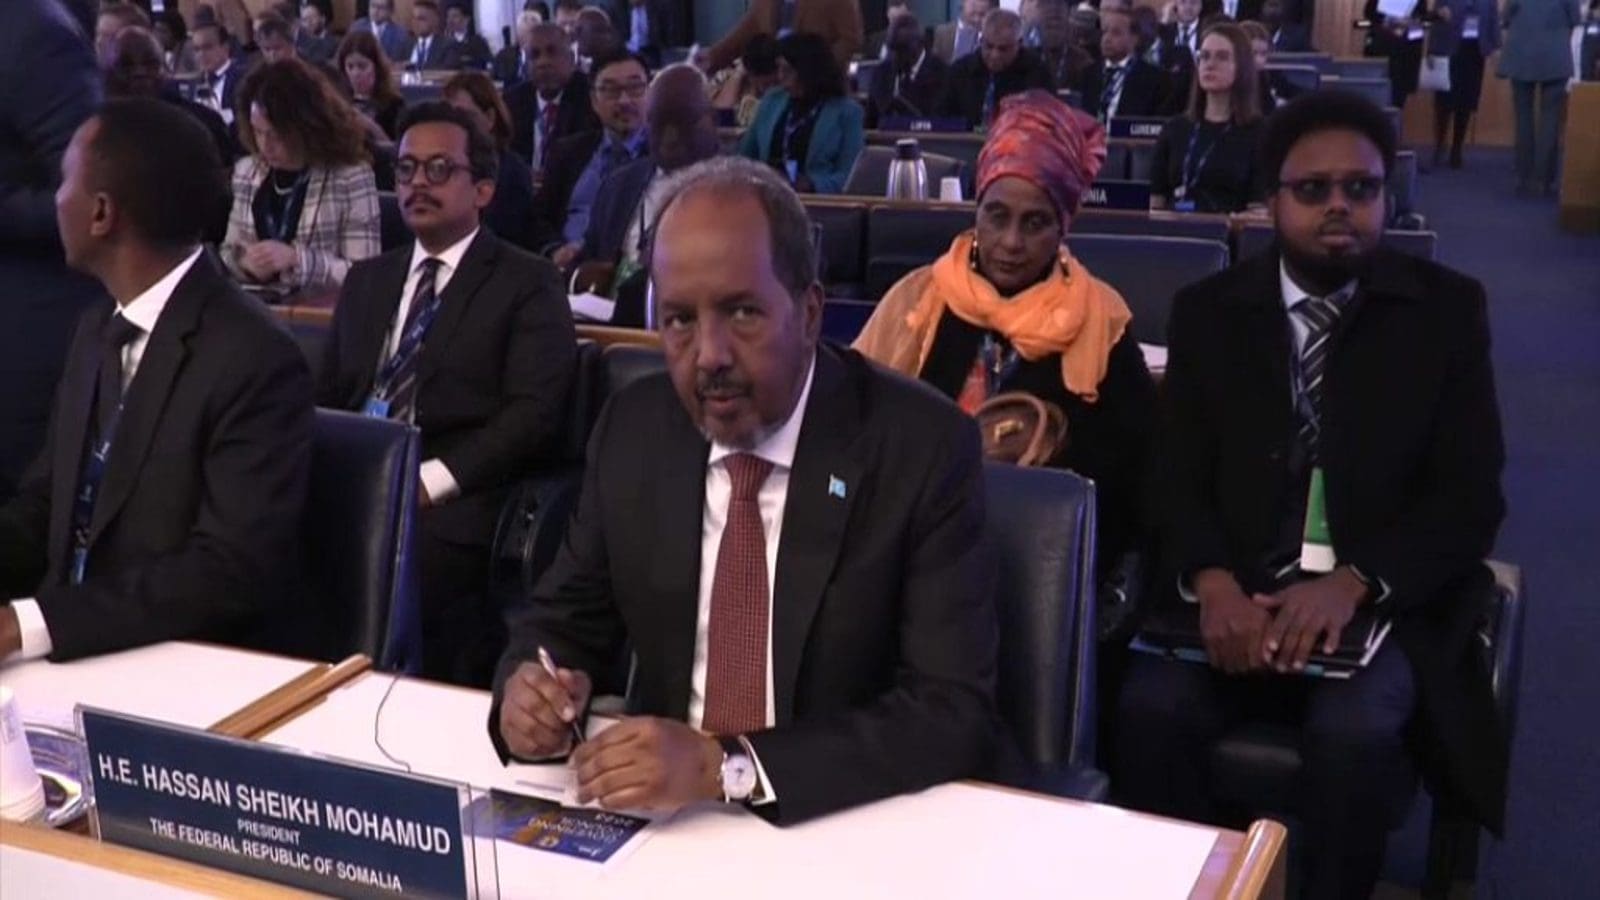 IFAD strengthens investments in Somalia, welcomes Ukraine as its 178th Member State